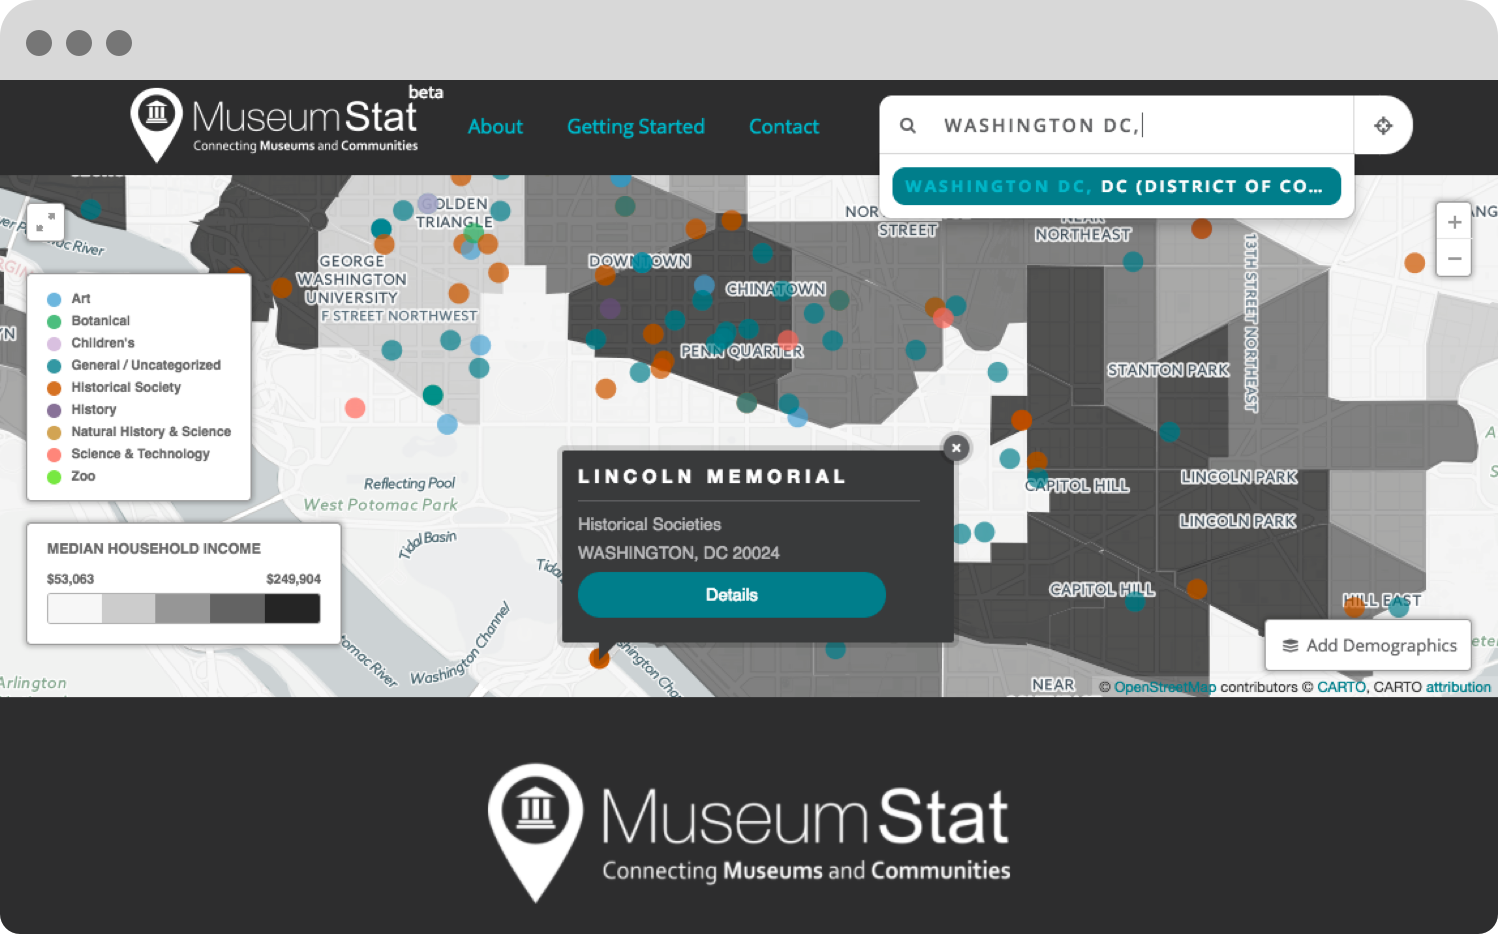 Use MuseumStat to visualize statistical data related to the location of the organization.